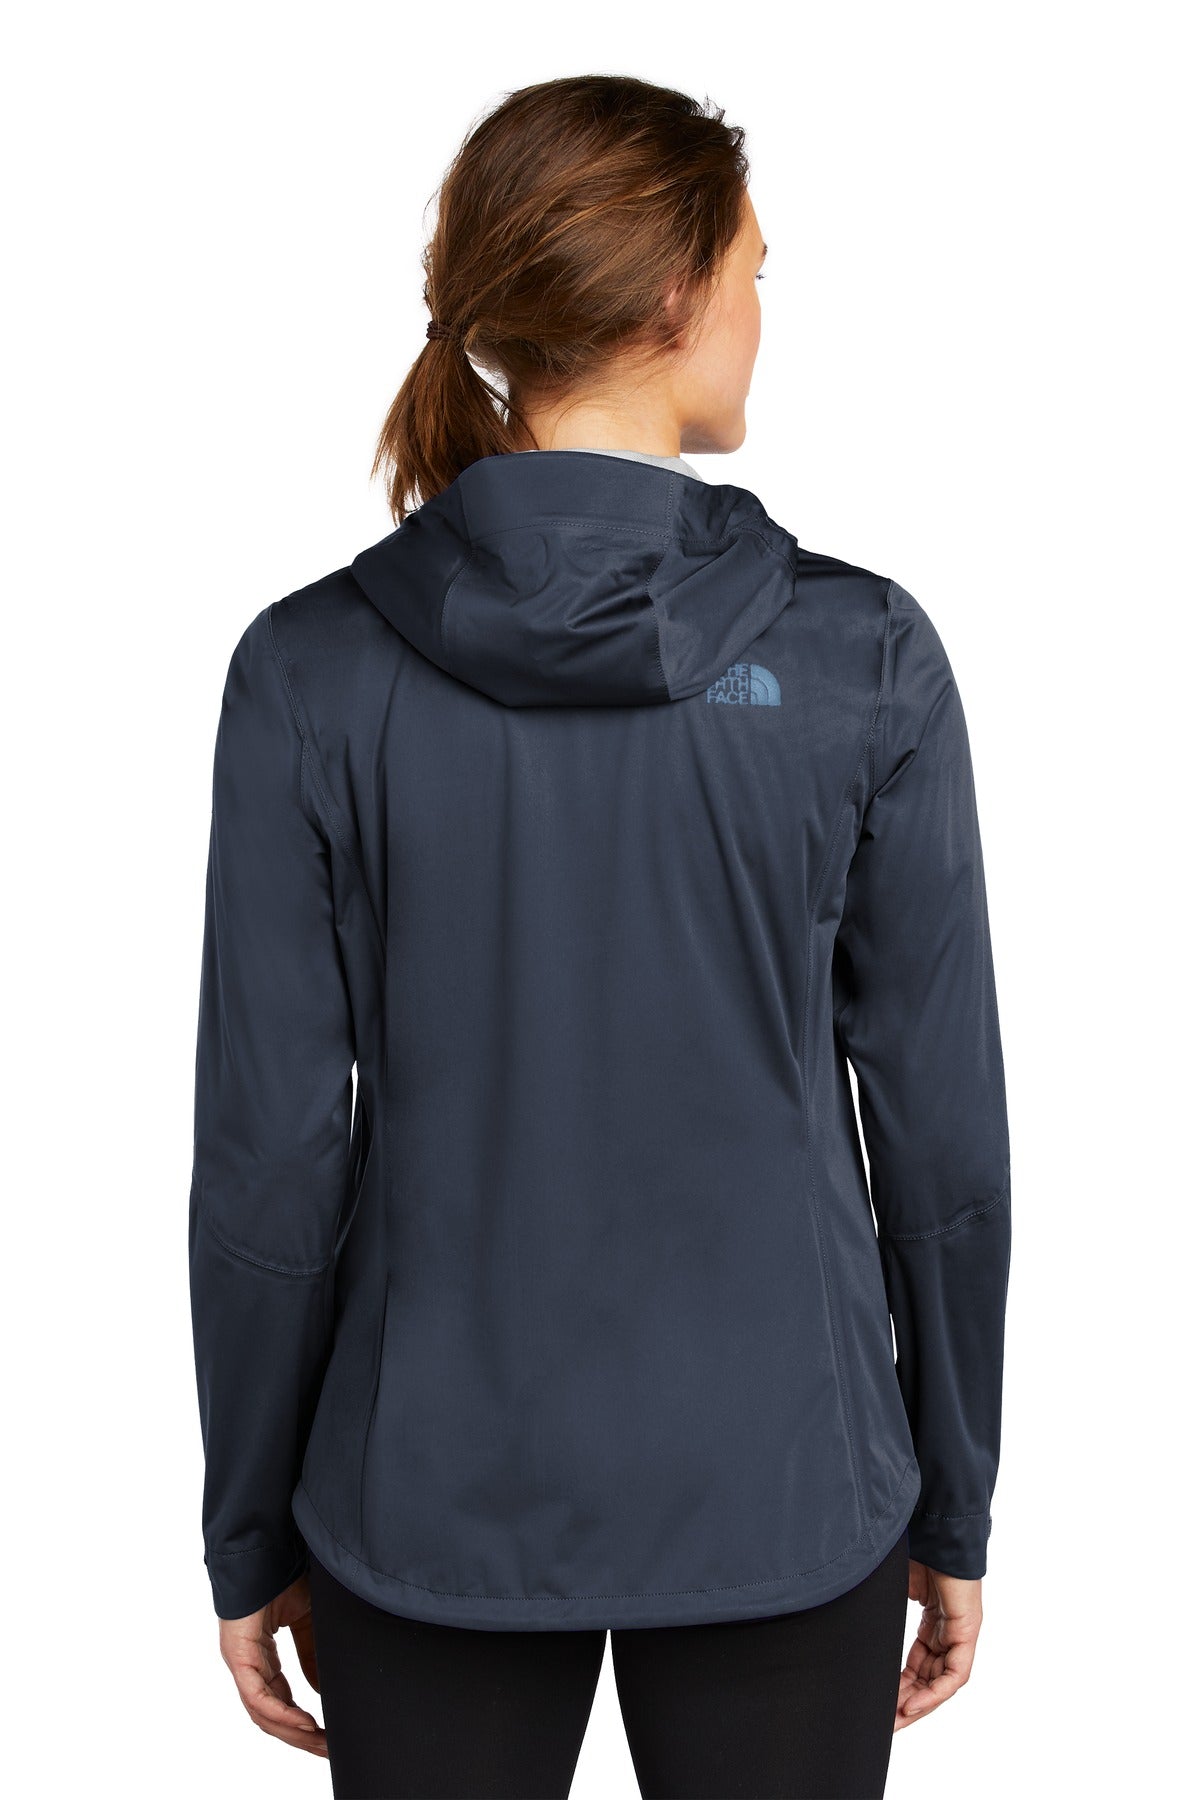 The North Face Ladies All-Weather DryVent ™ Stretch Jacket NF0A47FH